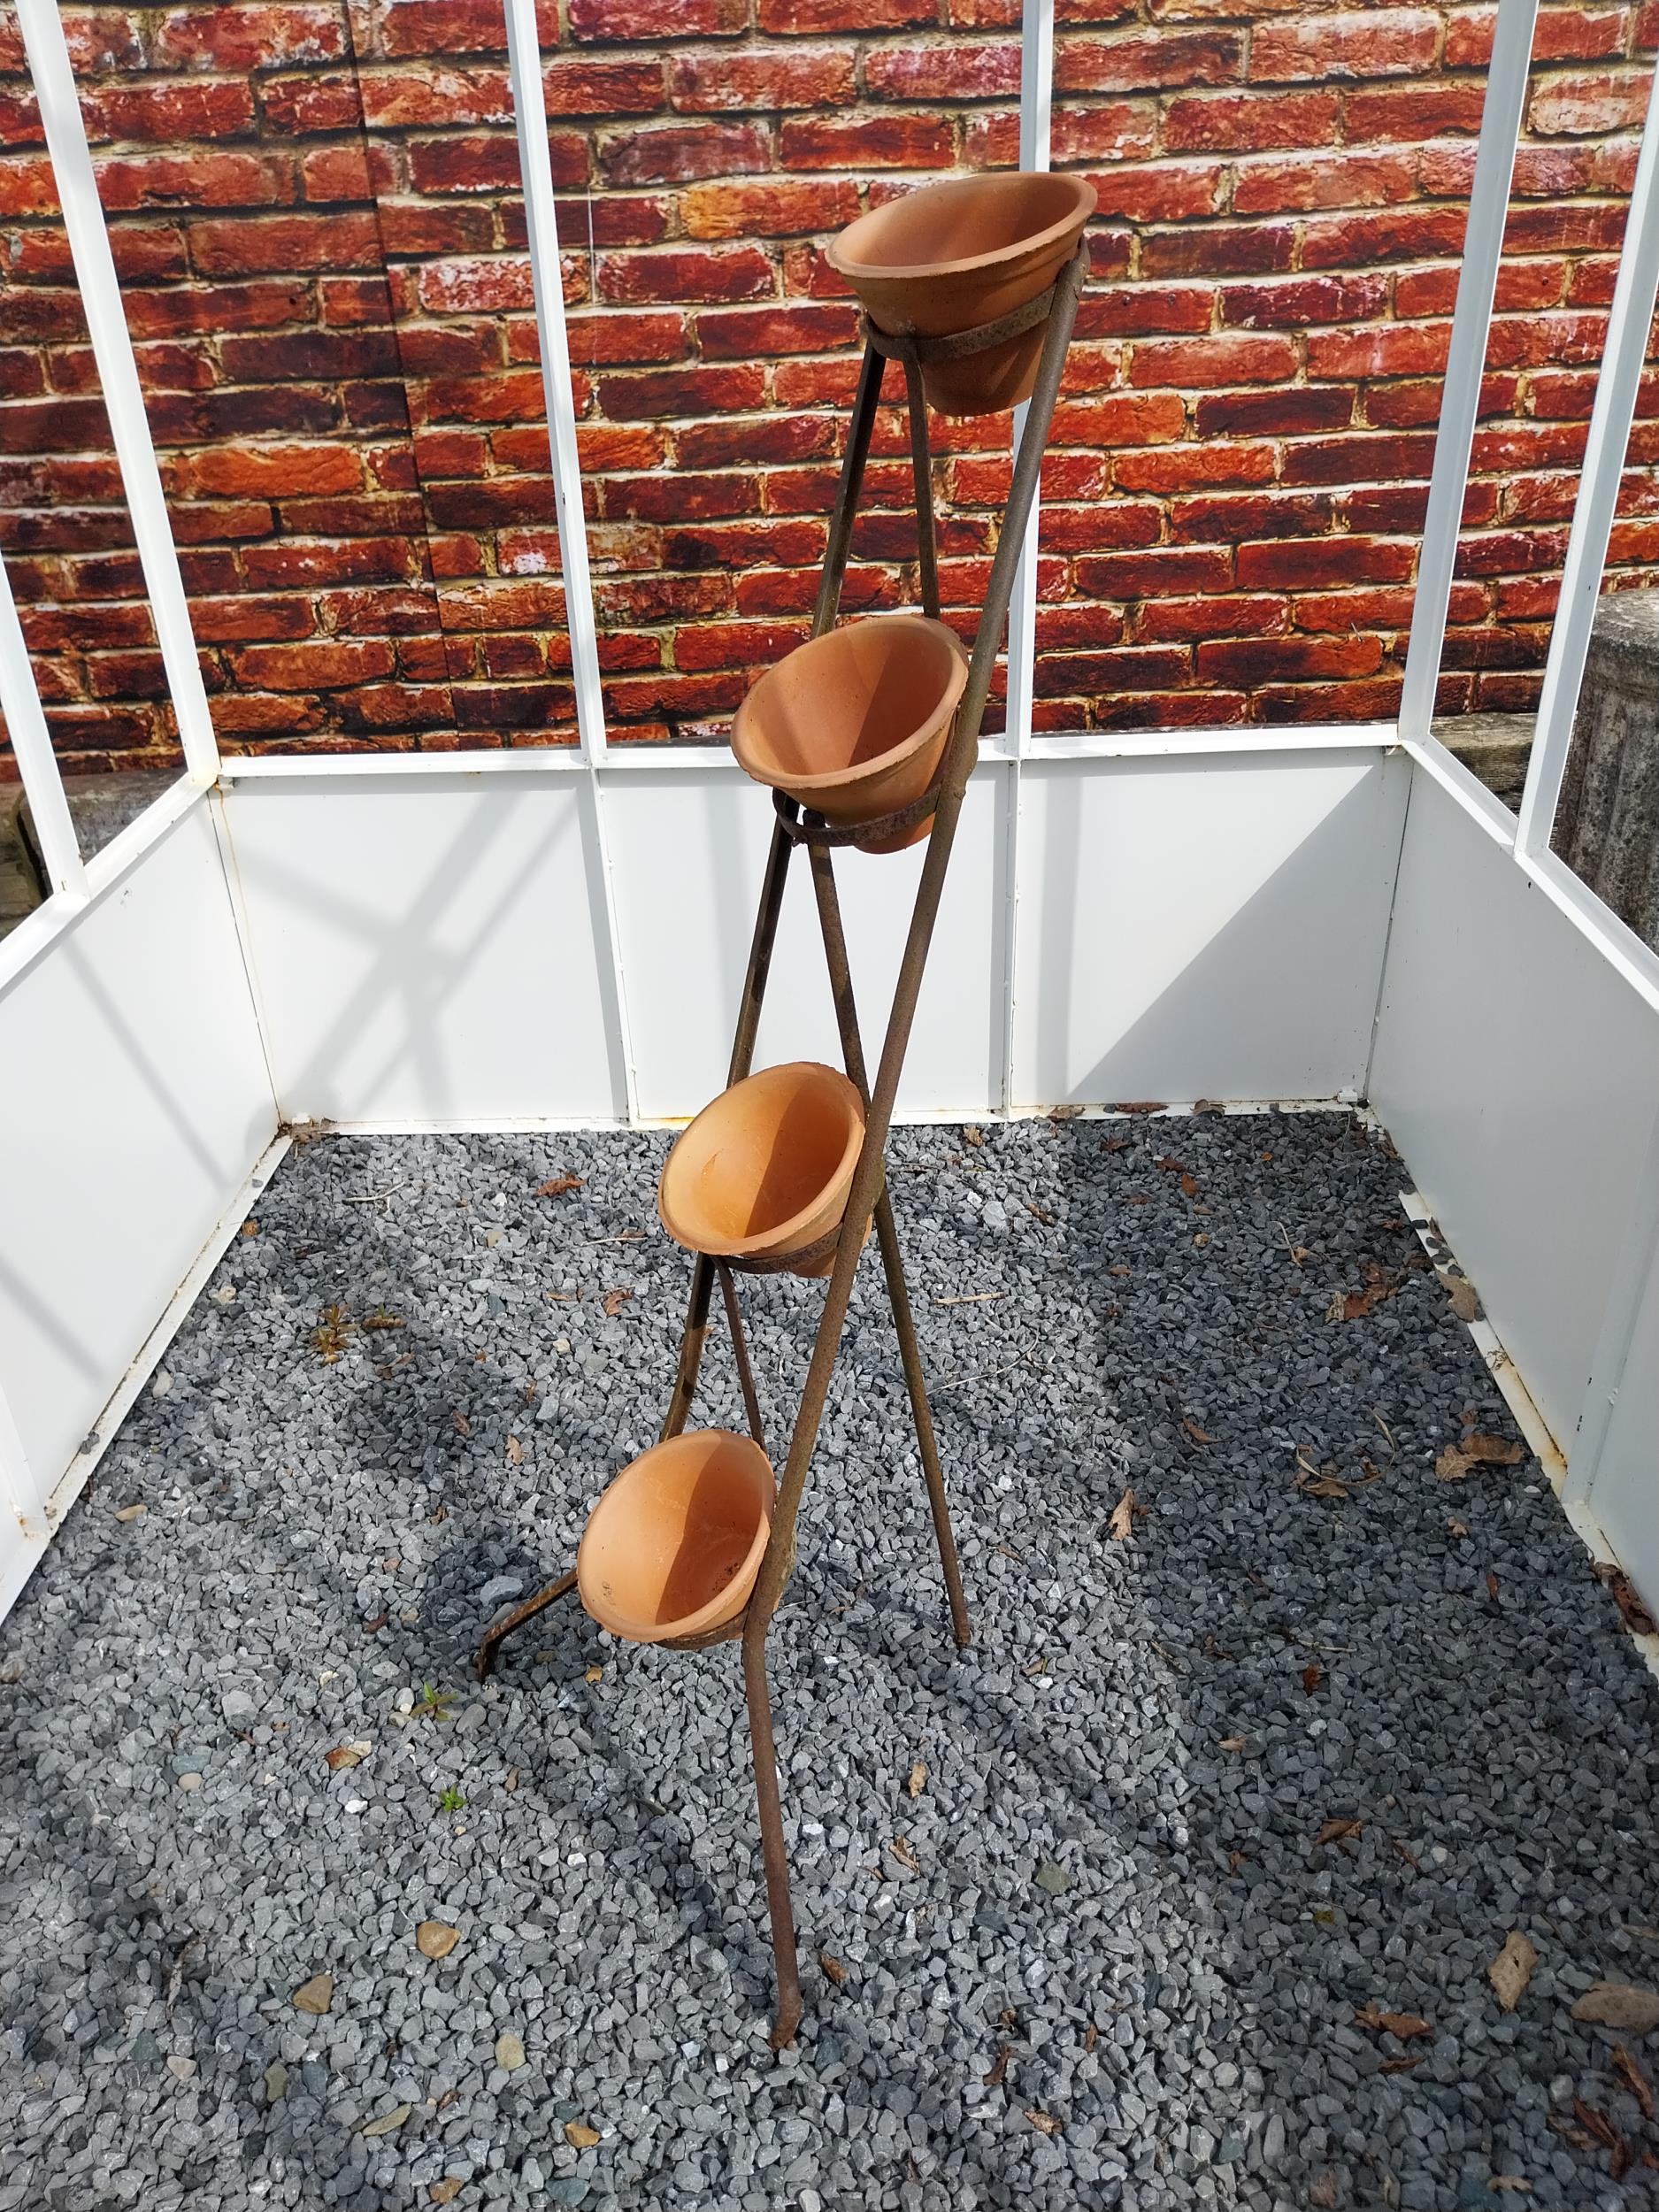 Early 20th C. four tiered wrought iron pot rack with terracotta plant pots {120 cm H x 46 cm W x